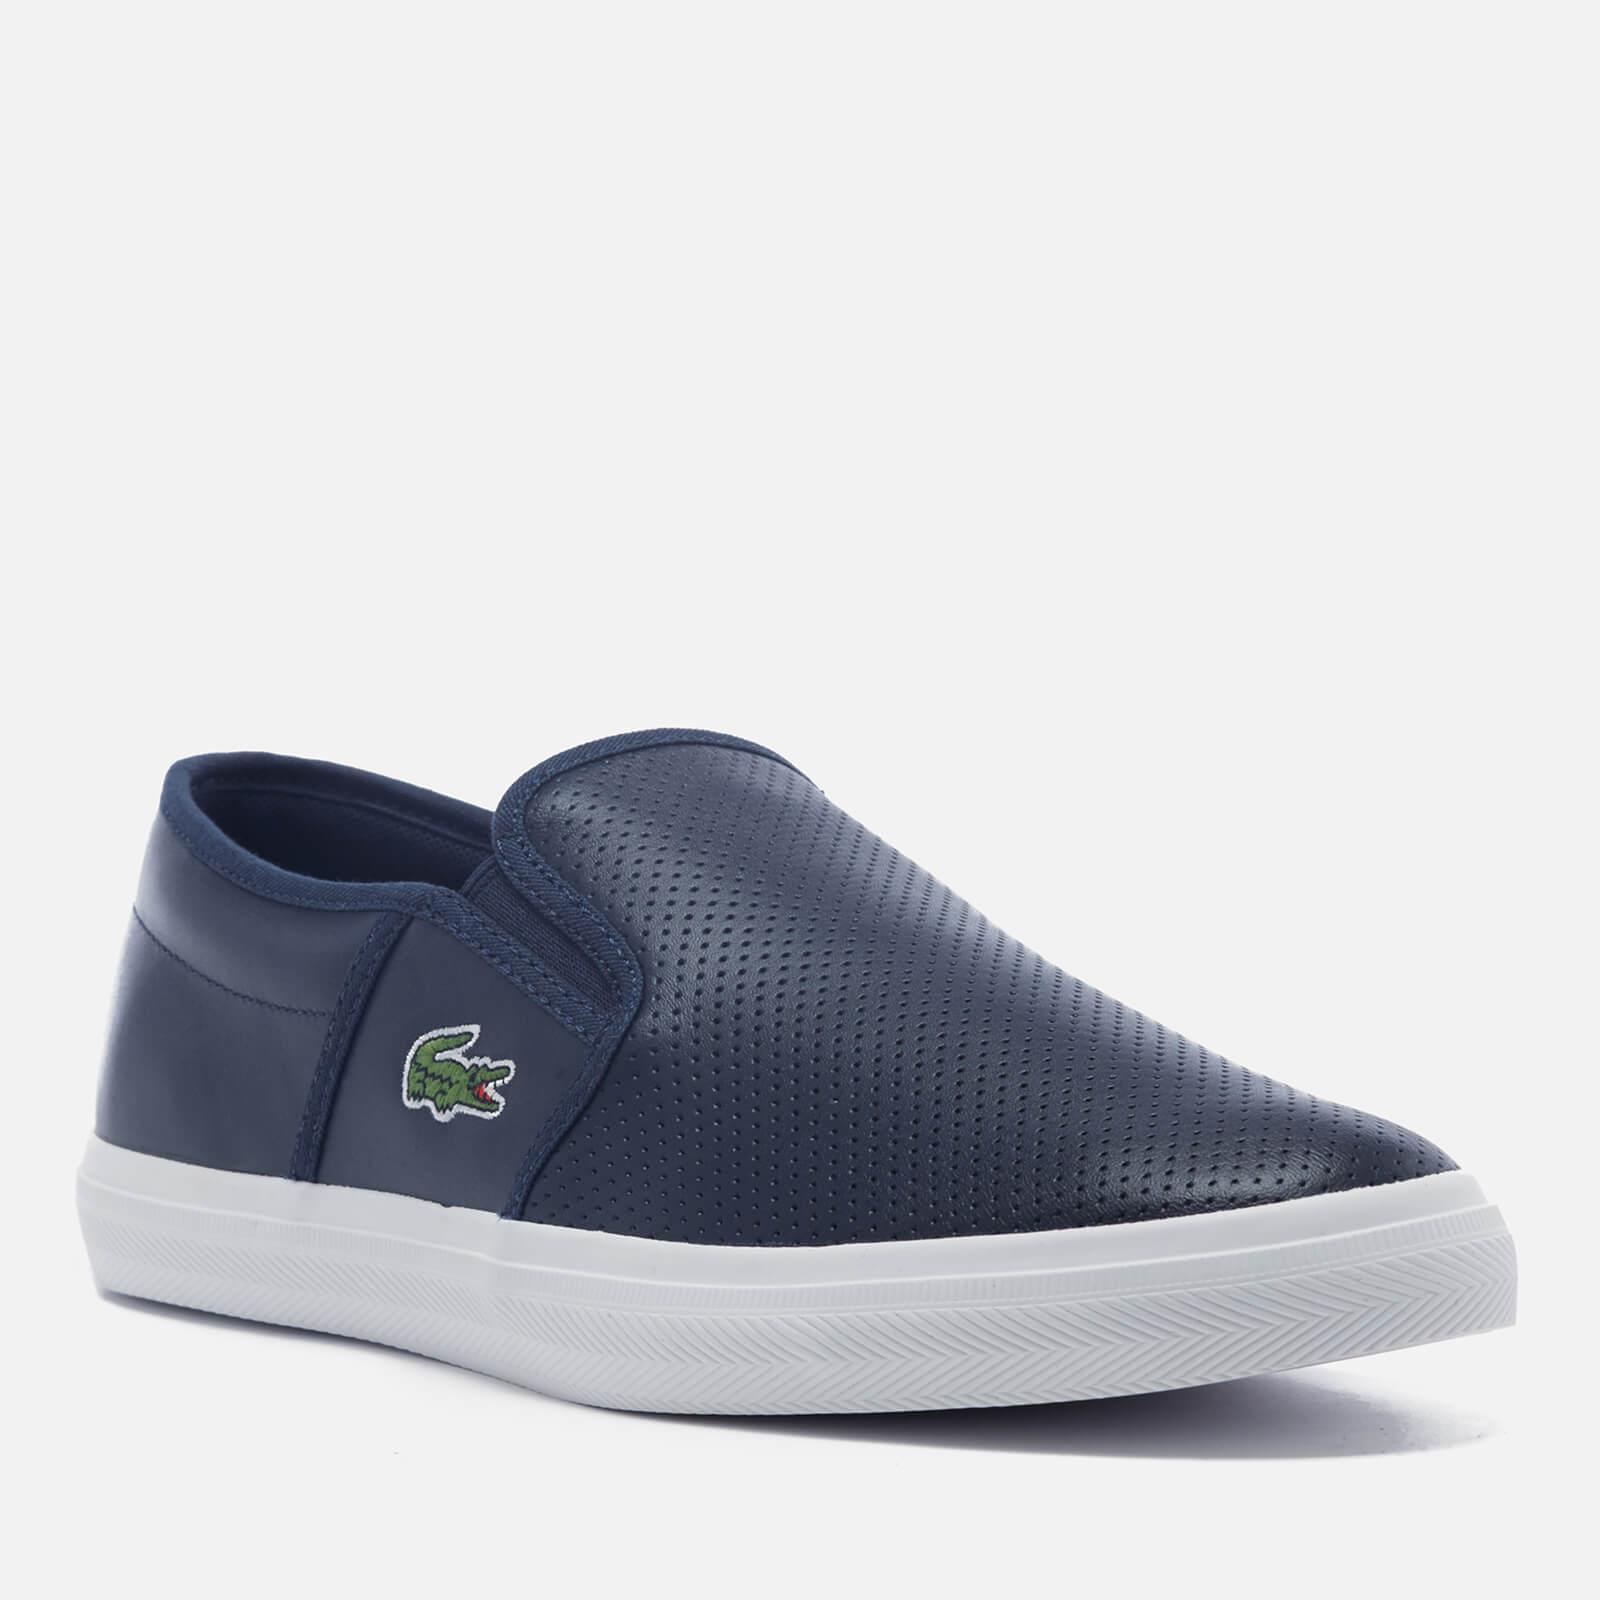 Lacoste Gazon Bl 1 Leather Slip-on Trainers in Navy (Blue) for Men - Lyst